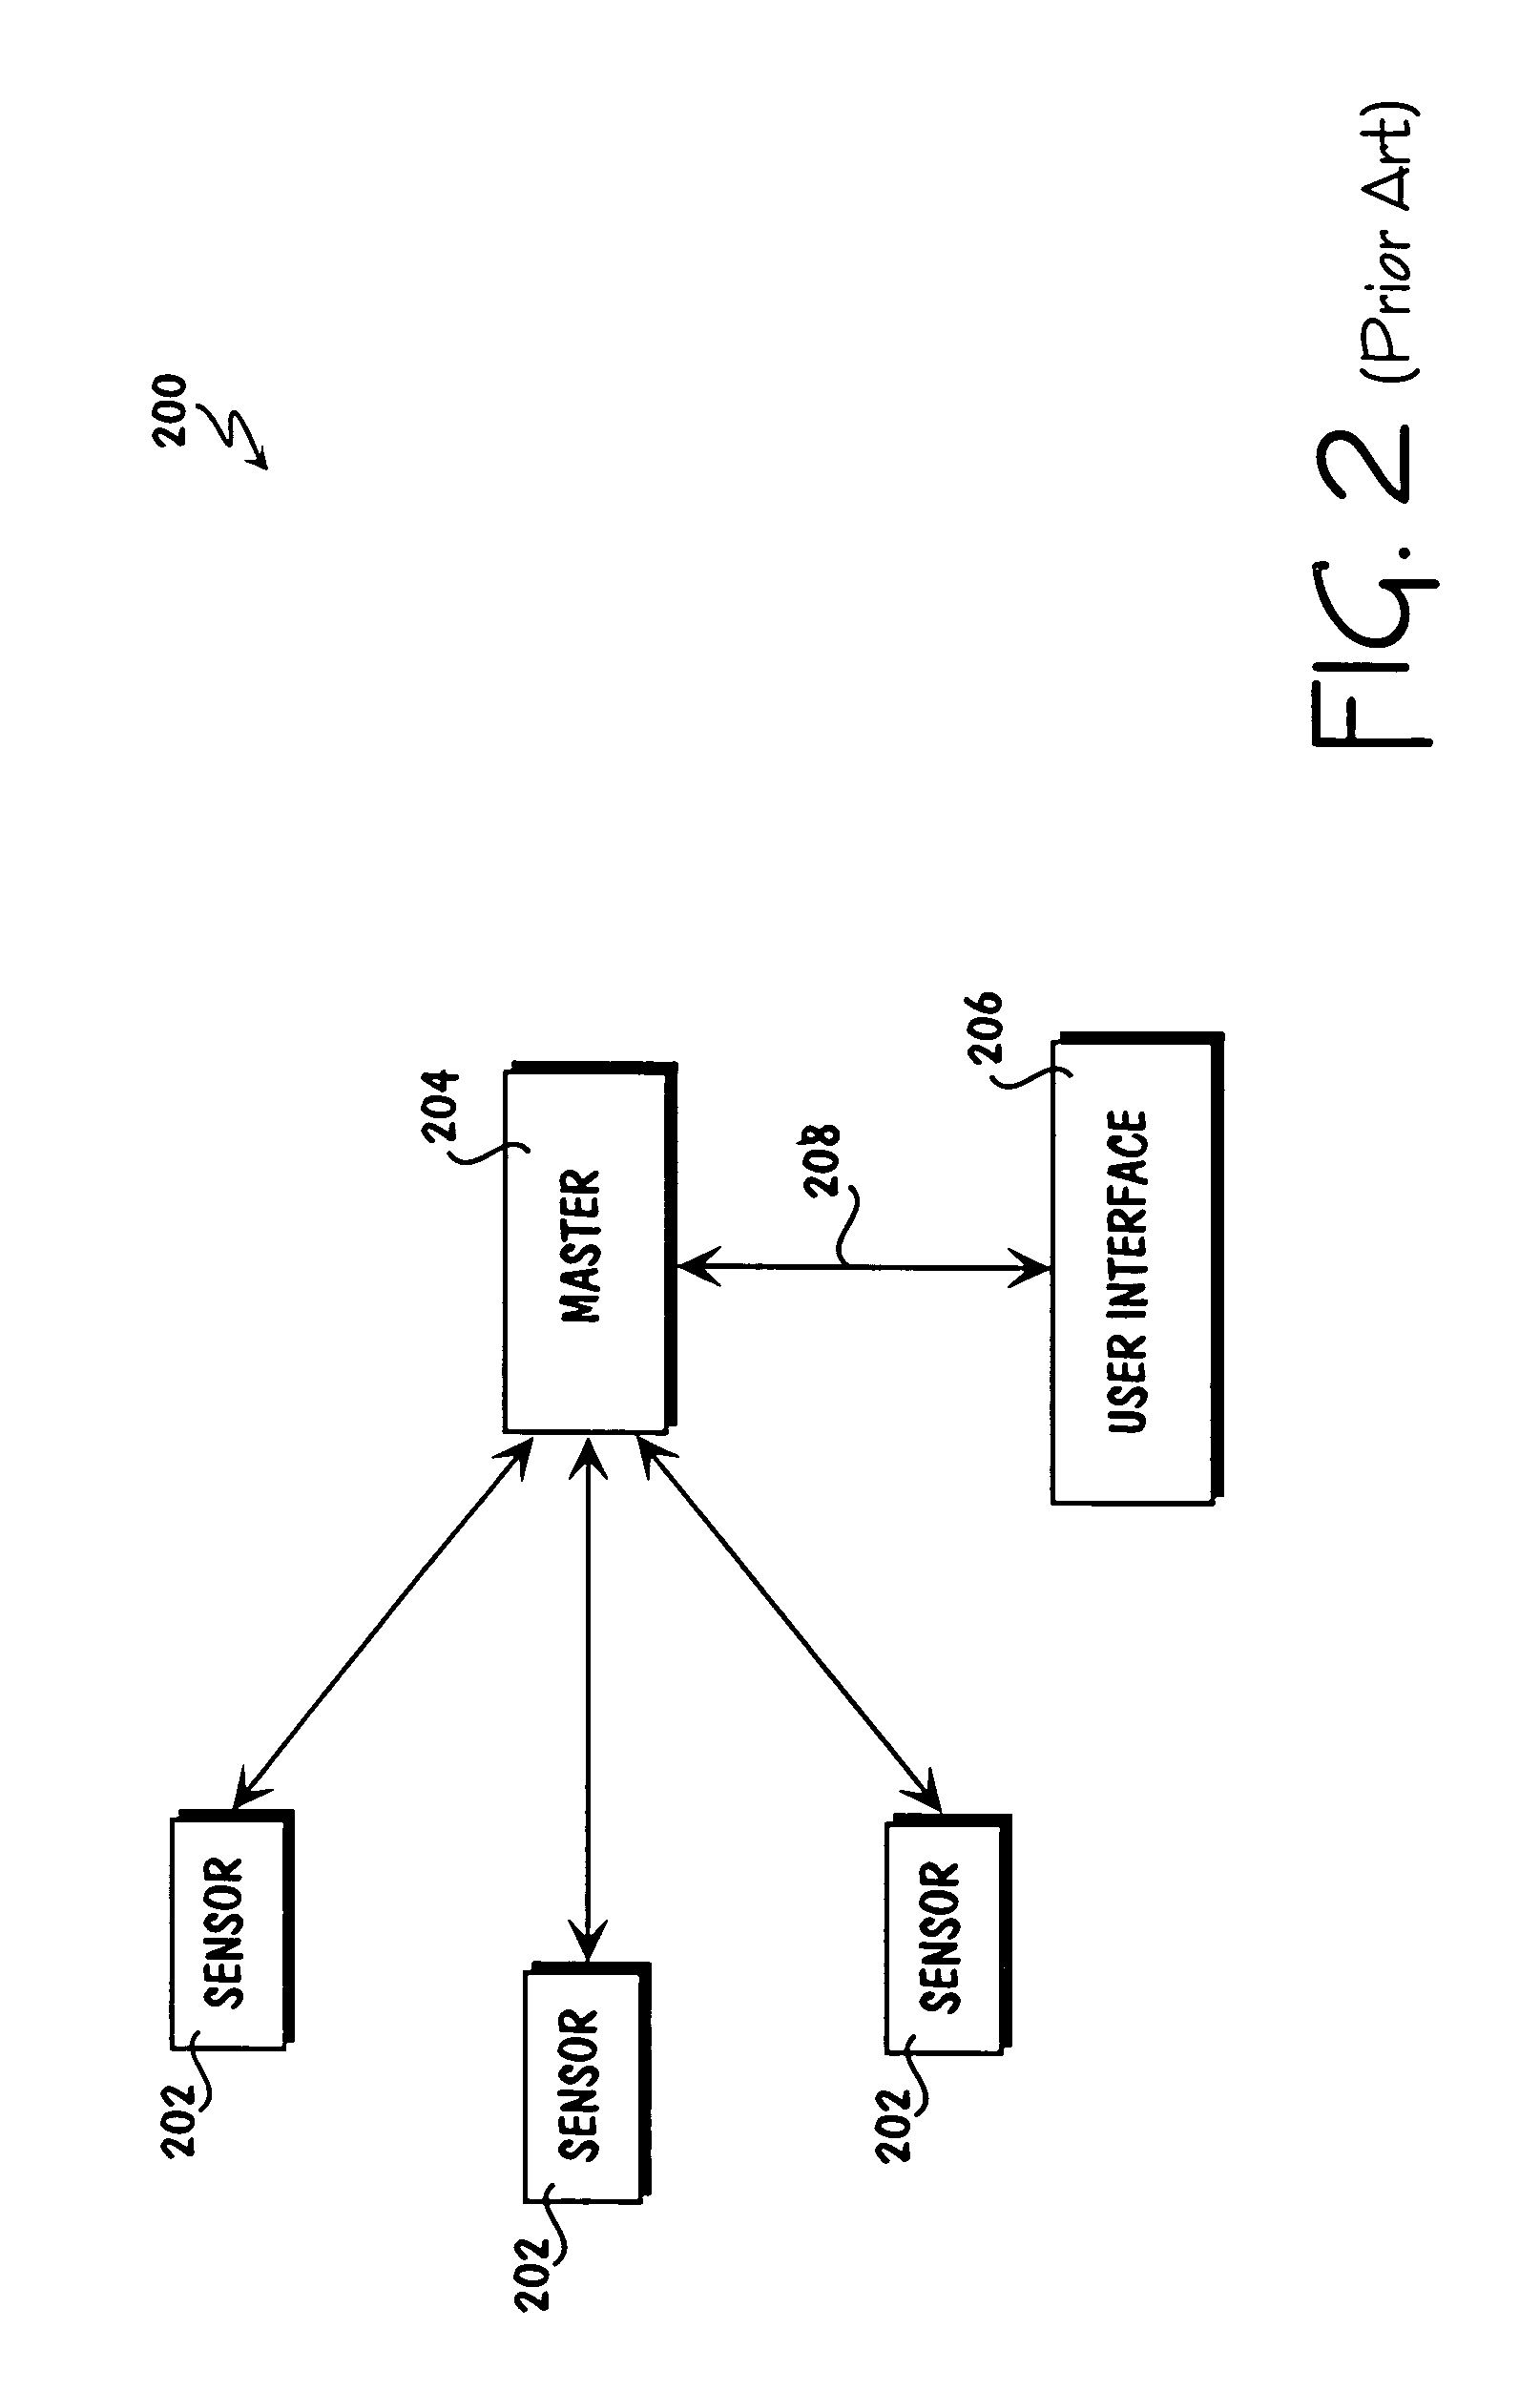 Method for collecting and processing data using internetworked wireless integrated network sensors (WINS)